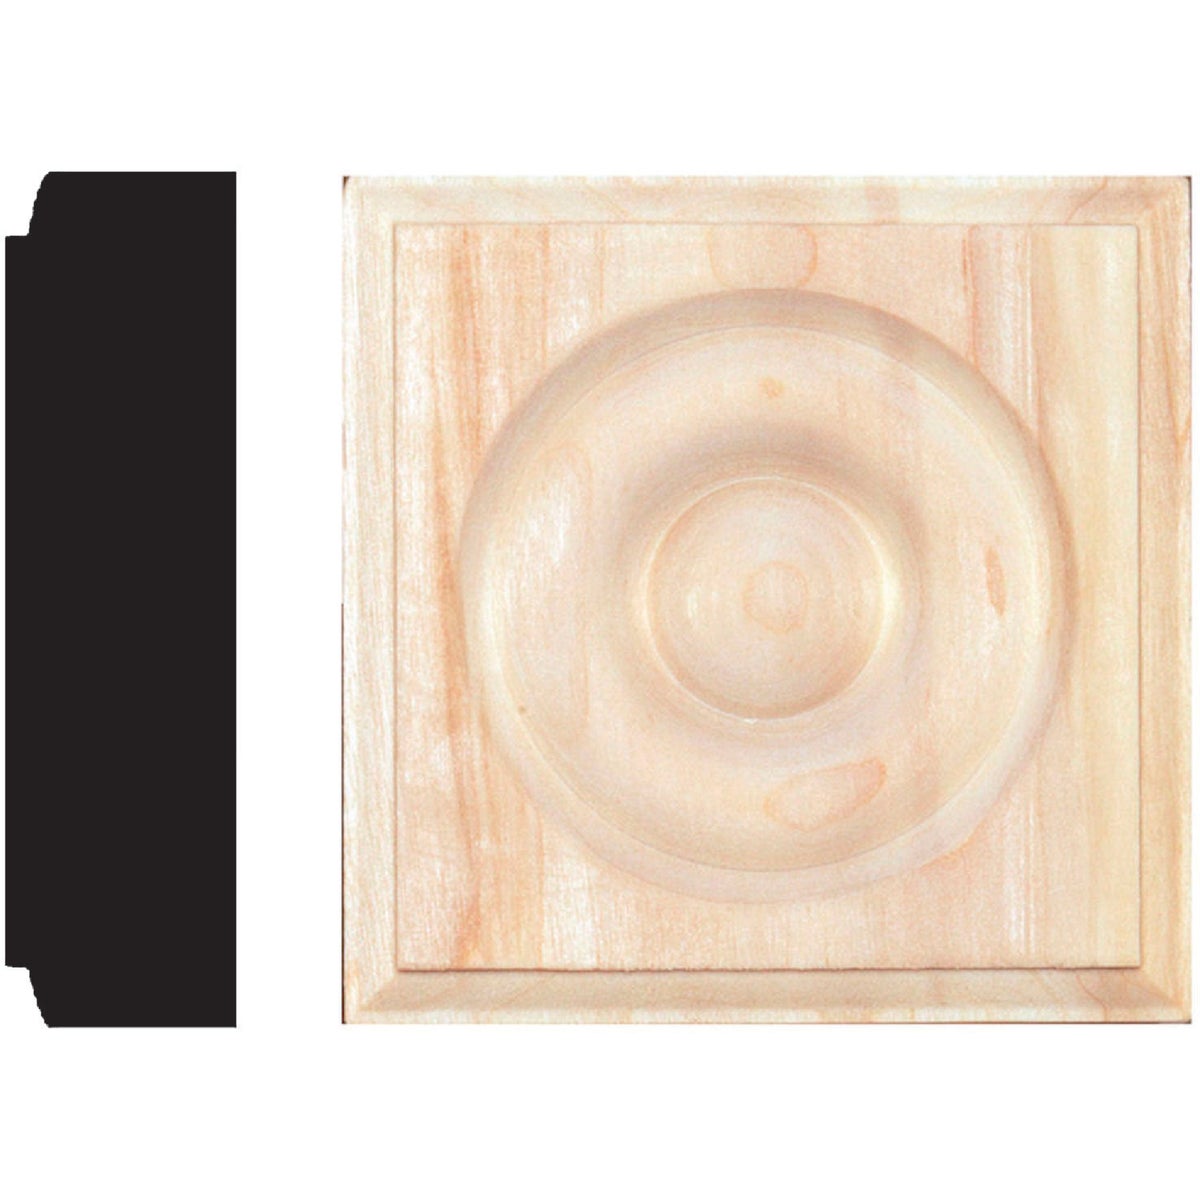 Item 181323, Hardwood sanded smooth and ready-to-finish with stain or paint.